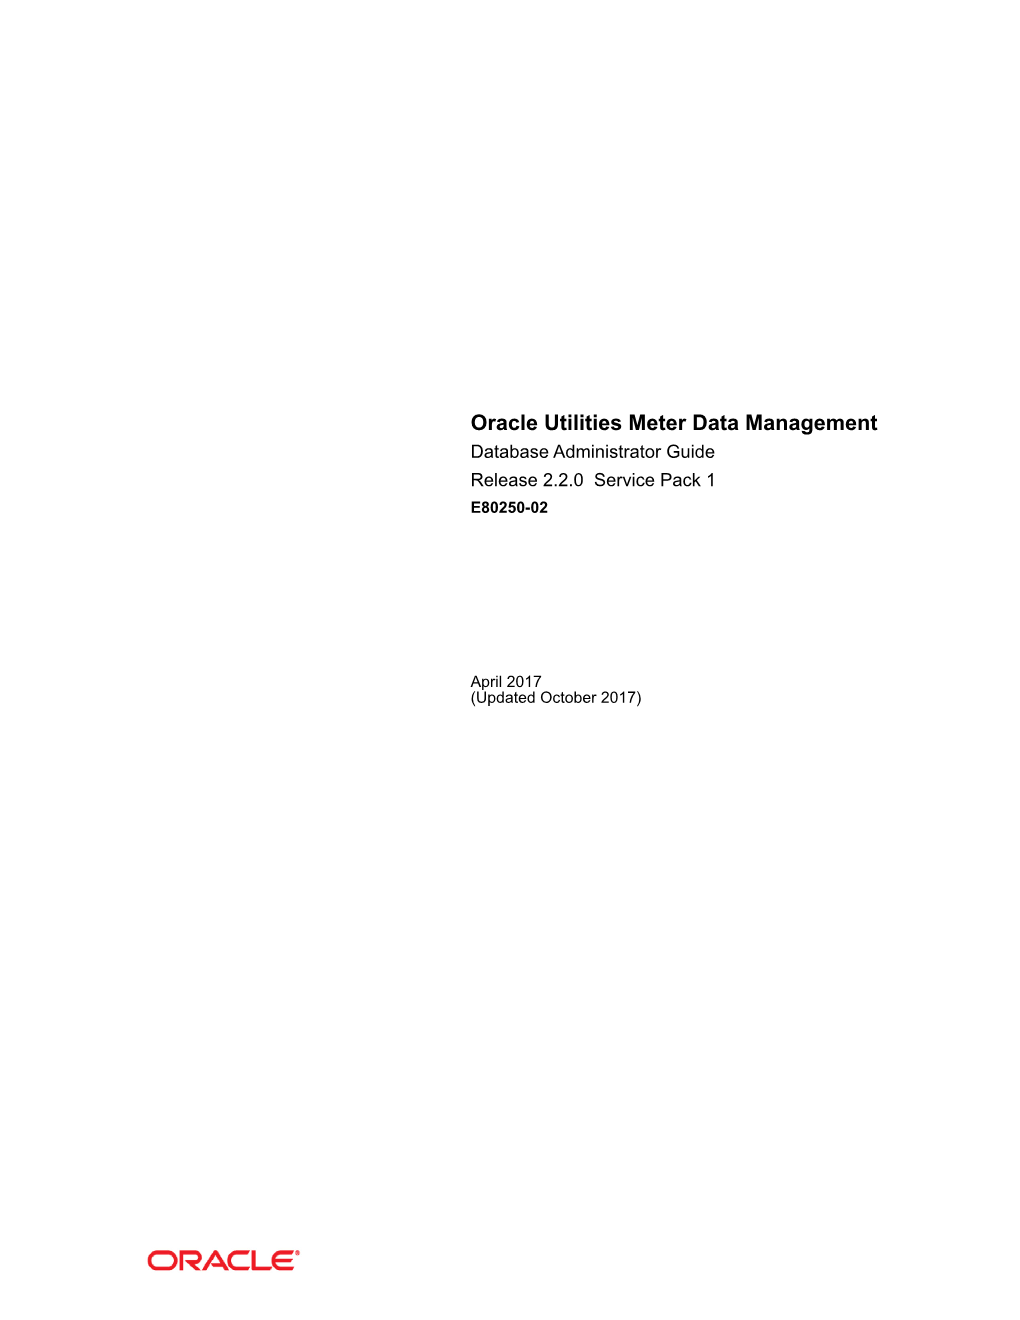 Oracle Utilities Meter Data Management Database Administrator Guide Release 2.2.0 Service Pack 1 E80250-02